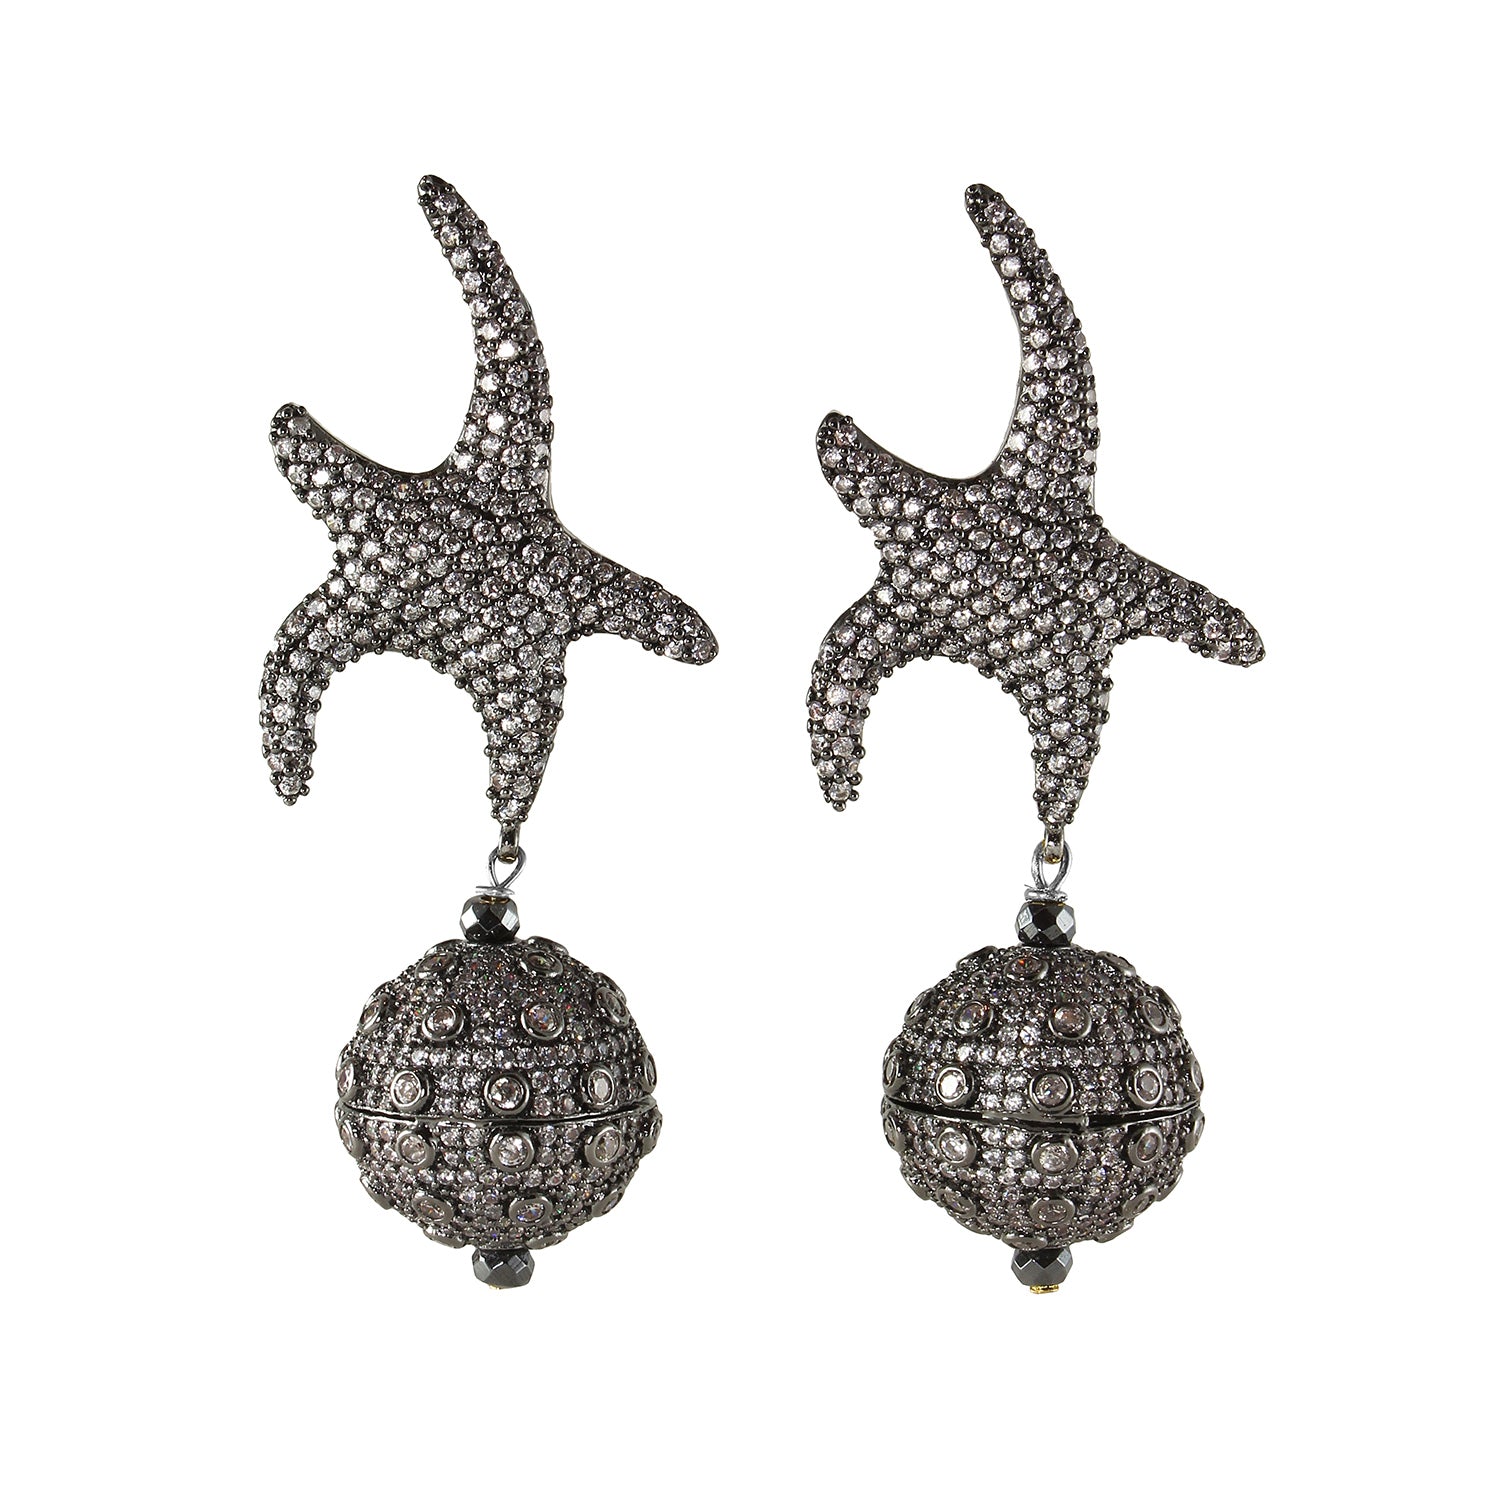 sliver star fish earrings with sliver balls with white cubic zircon stone made in turkey